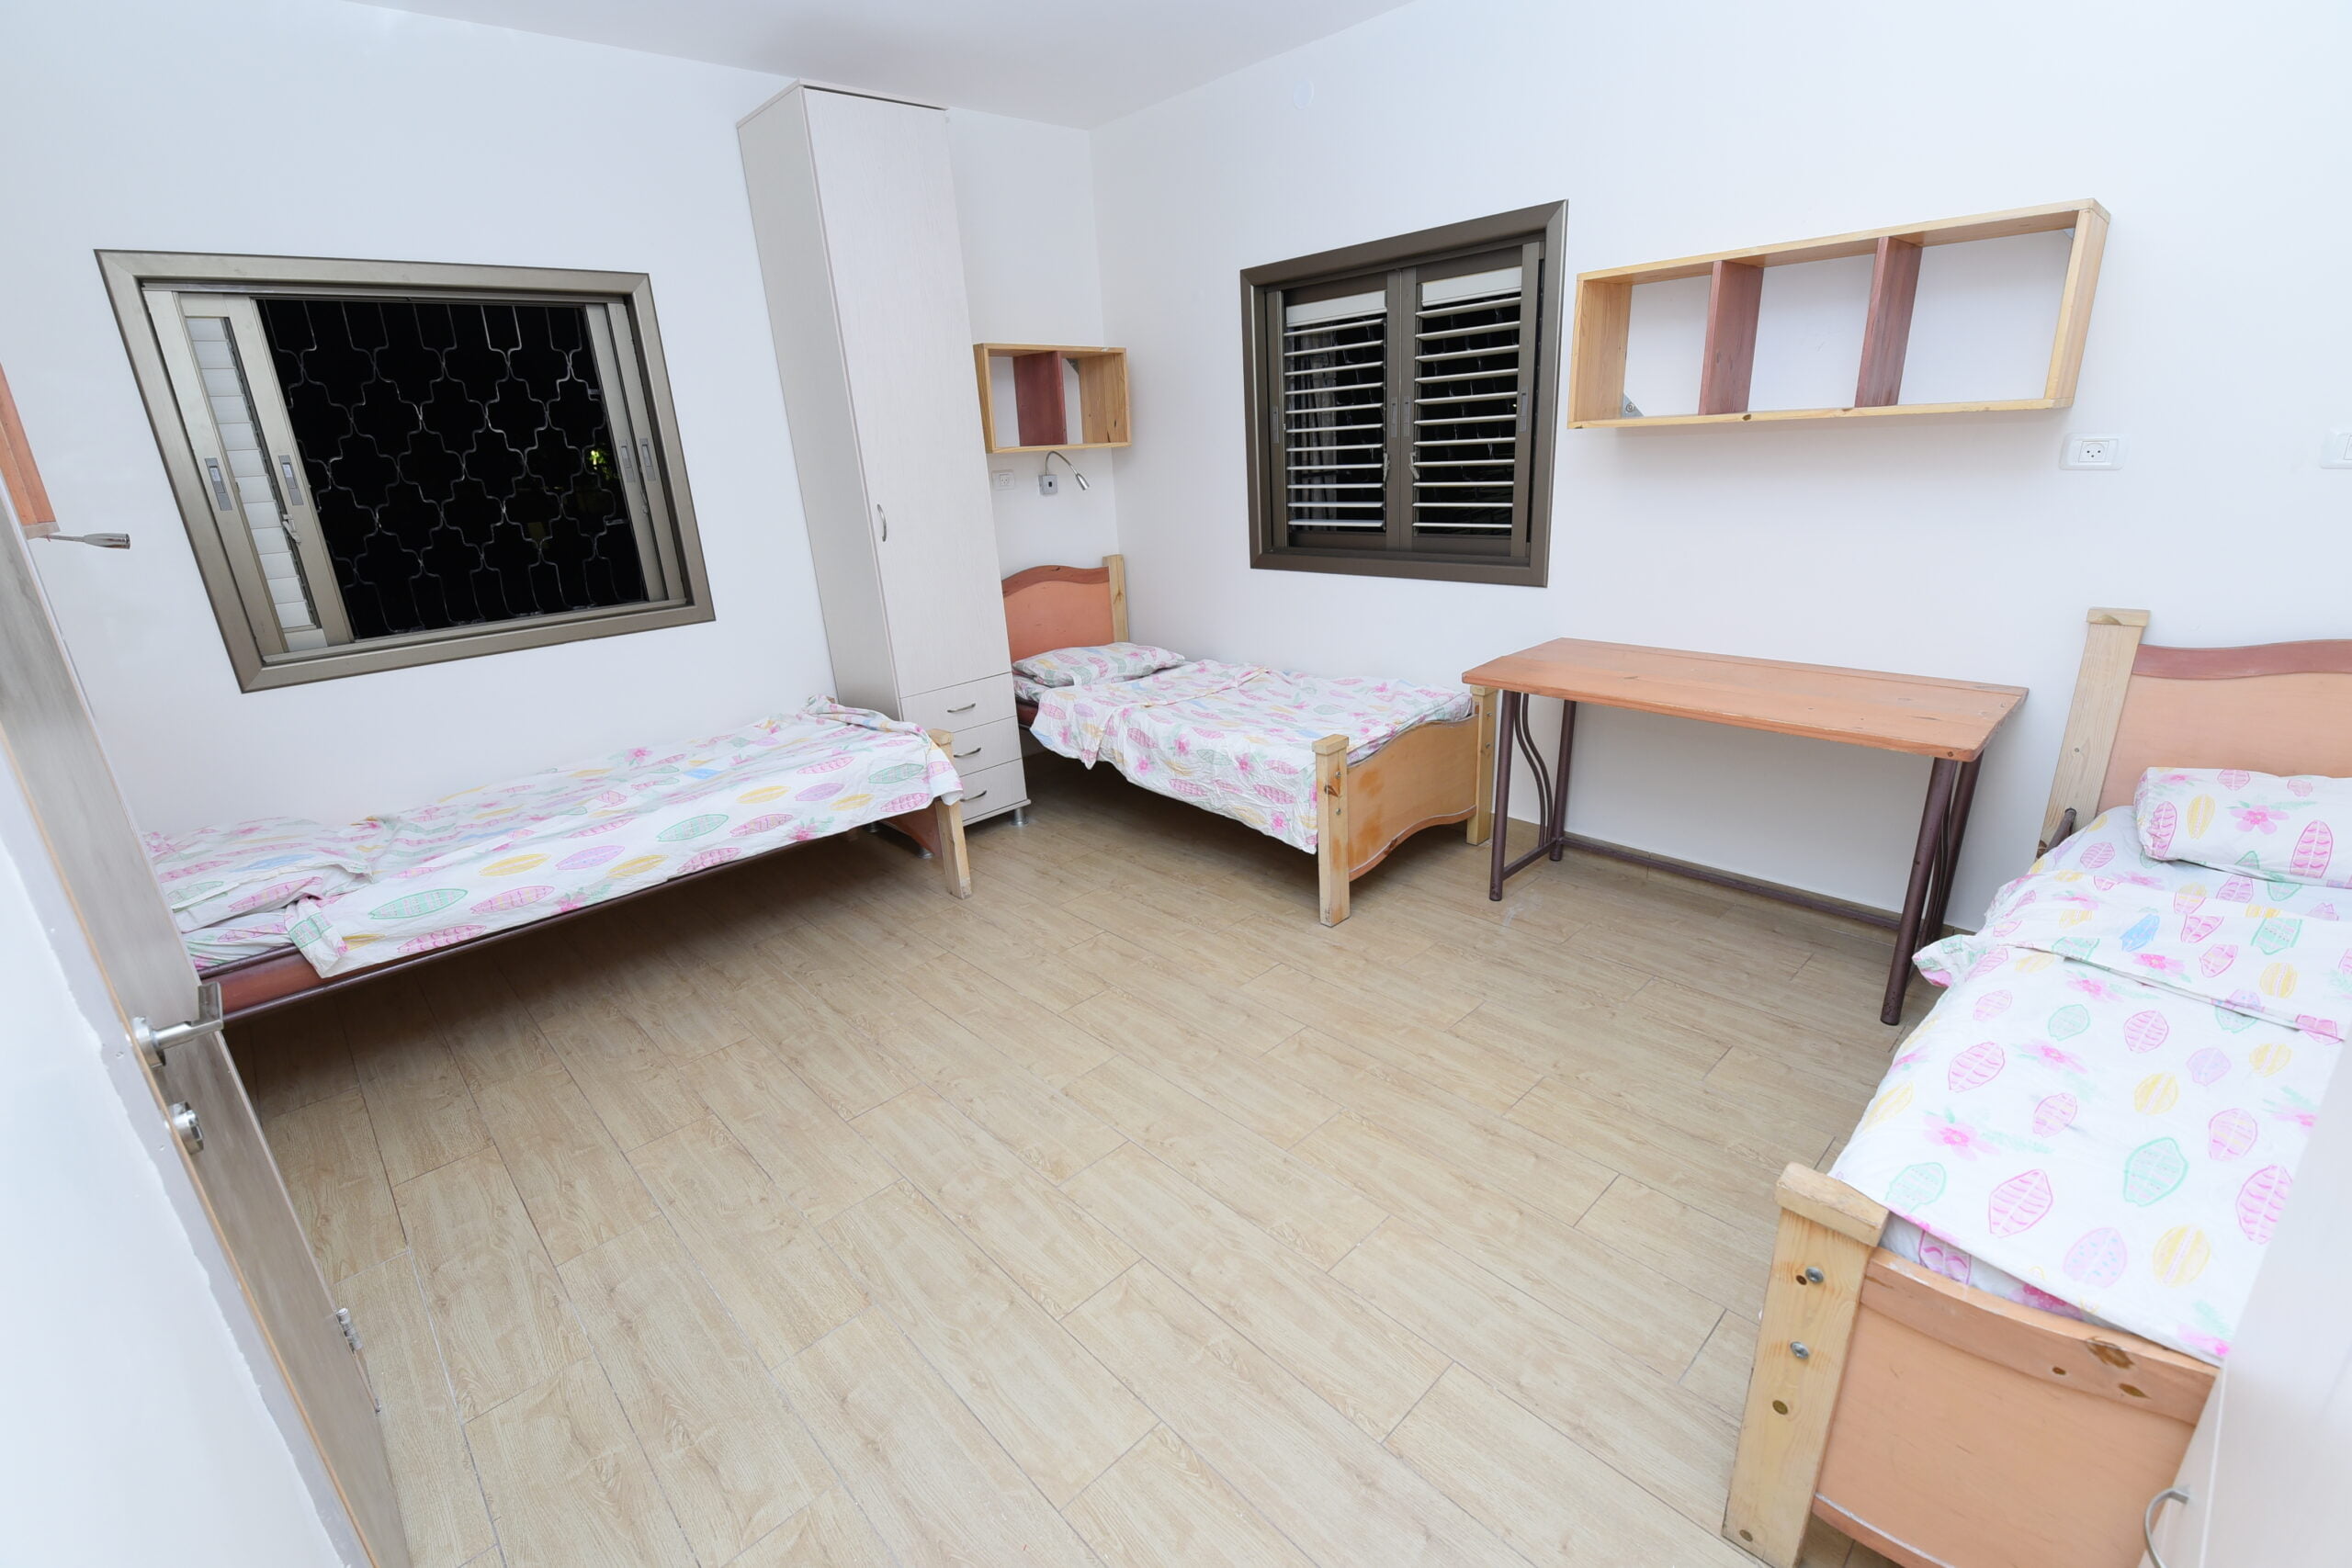 Brand new dormitory bedroom at the Keren Hayeled orphanage